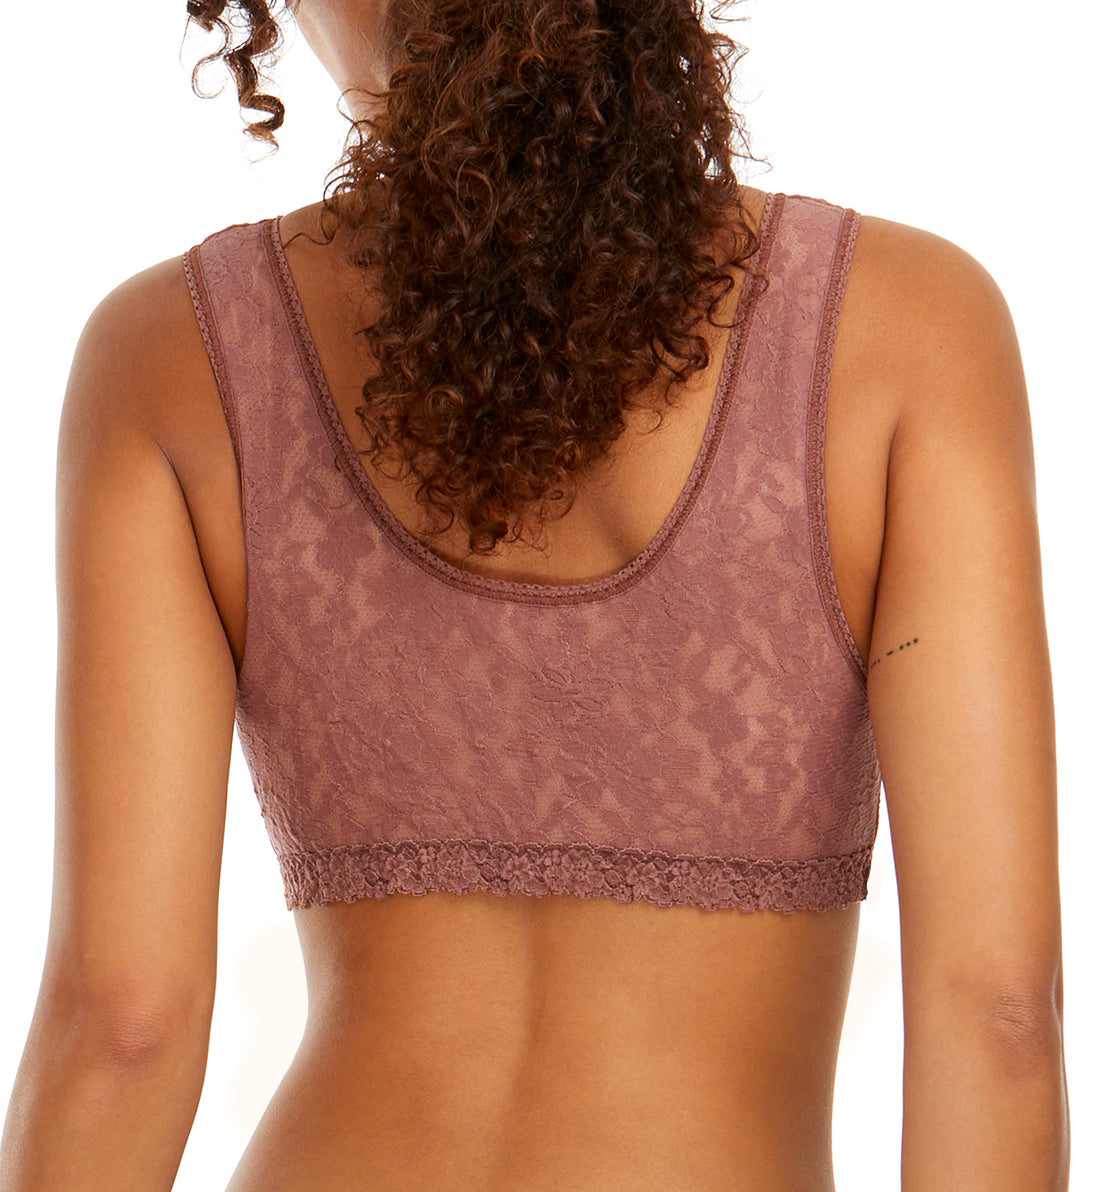 Hanky Panky Daily Lace Scoop Neck Lined Bralette (777991),XS,All Spice - All Spice,XS